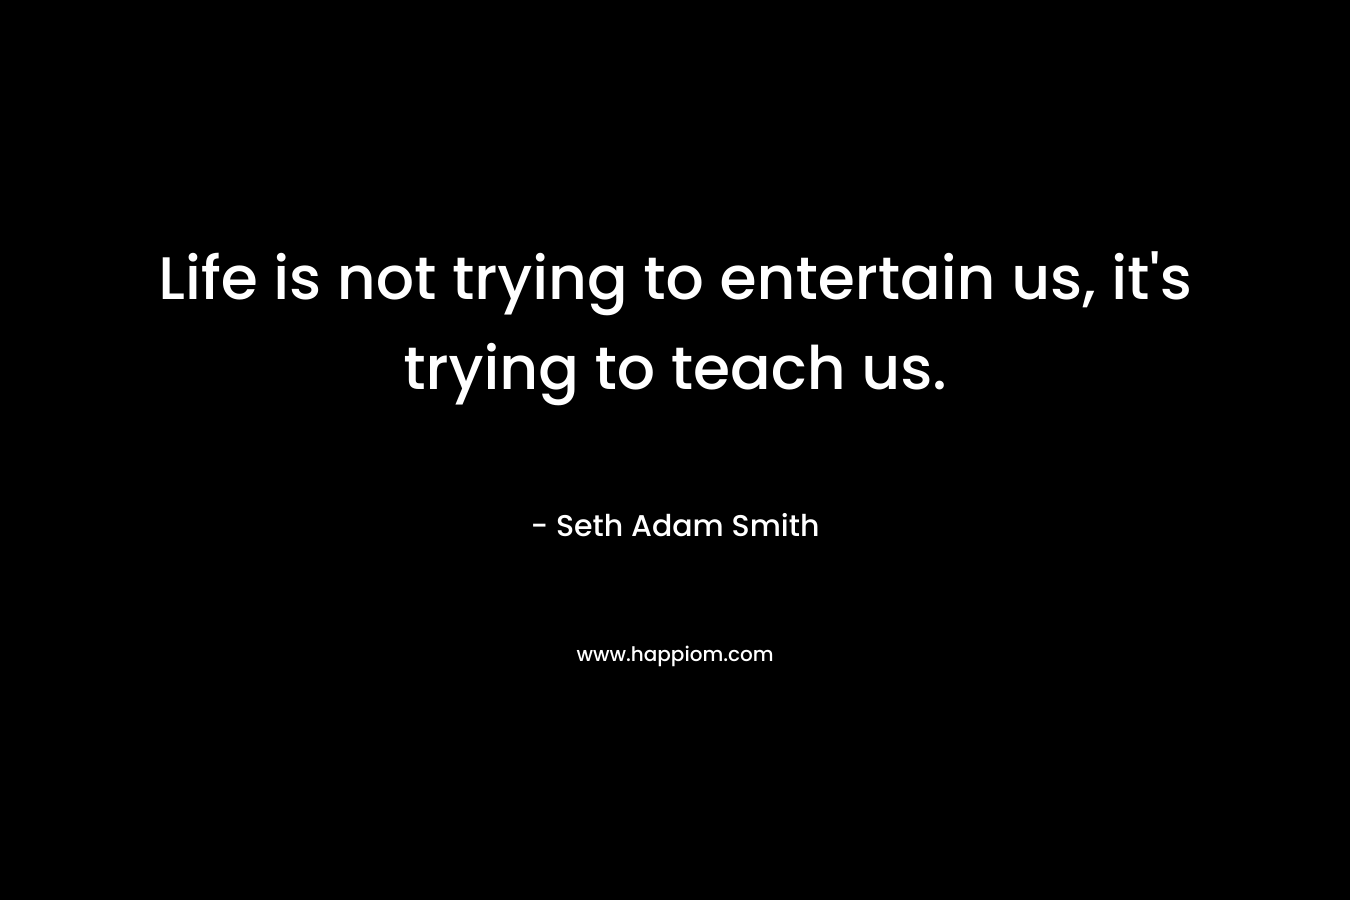 Life is not trying to entertain us, it's trying to teach us.